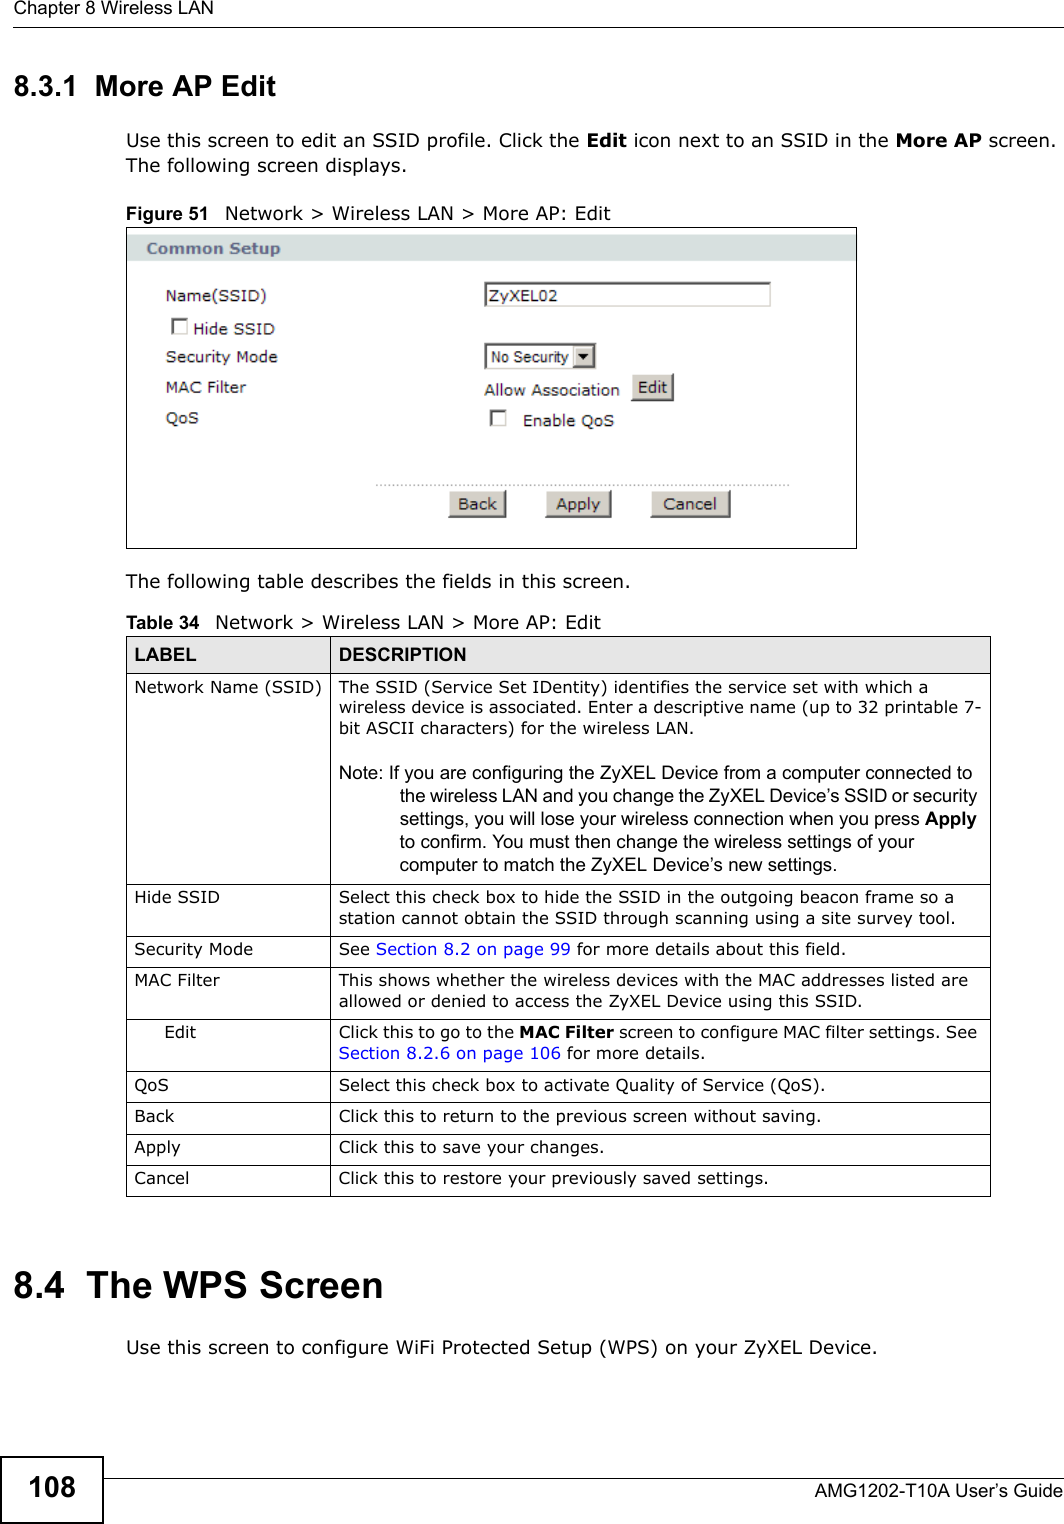 Chapter 8 Wireless LANAMG1202-T10A User’s Guide1088.3.1  More AP EditUse this screen to edit an SSID profile. Click the Edit icon next to an SSID in the More AP screen. The following screen displays.Figure 51   Network &gt; Wireless LAN &gt; More AP: EditThe following table describes the fields in this screen.8.4  The WPS ScreenUse this screen to configure WiFi Protected Setup (WPS) on your ZyXEL Device.Table 34   Network &gt; Wireless LAN &gt; More AP: EditLABEL DESCRIPTIONNetwork Name (SSID) The SSID (Service Set IDentity) identifies the service set with which a wireless device is associated. Enter a descriptive name (up to 32 printable 7-bit ASCII characters) for the wireless LAN. Note: If you are configuring the ZyXEL Device from a computer connected to the wireless LAN and you change the ZyXEL Device’s SSID or security settings, you will lose your wireless connection when you press Apply to confirm. You must then change the wireless settings of your computer to match the ZyXEL Device’s new settings.Hide SSID Select this check box to hide the SSID in the outgoing beacon frame so a station cannot obtain the SSID through scanning using a site survey tool.Security Mode See Section 8.2 on page 99 for more details about this field.MAC Filter  This shows whether the wireless devices with the MAC addresses listed are allowed or denied to access the ZyXEL Device using this SSID.Edit Click this to go to the MAC Filter screen to configure MAC filter settings. See Section 8.2.6 on page 106 for more details.QoS Select this check box to activate Quality of Service (QoS).Back Click this to return to the previous screen without saving.Apply Click this to save your changes.Cancel Click this to restore your previously saved settings.